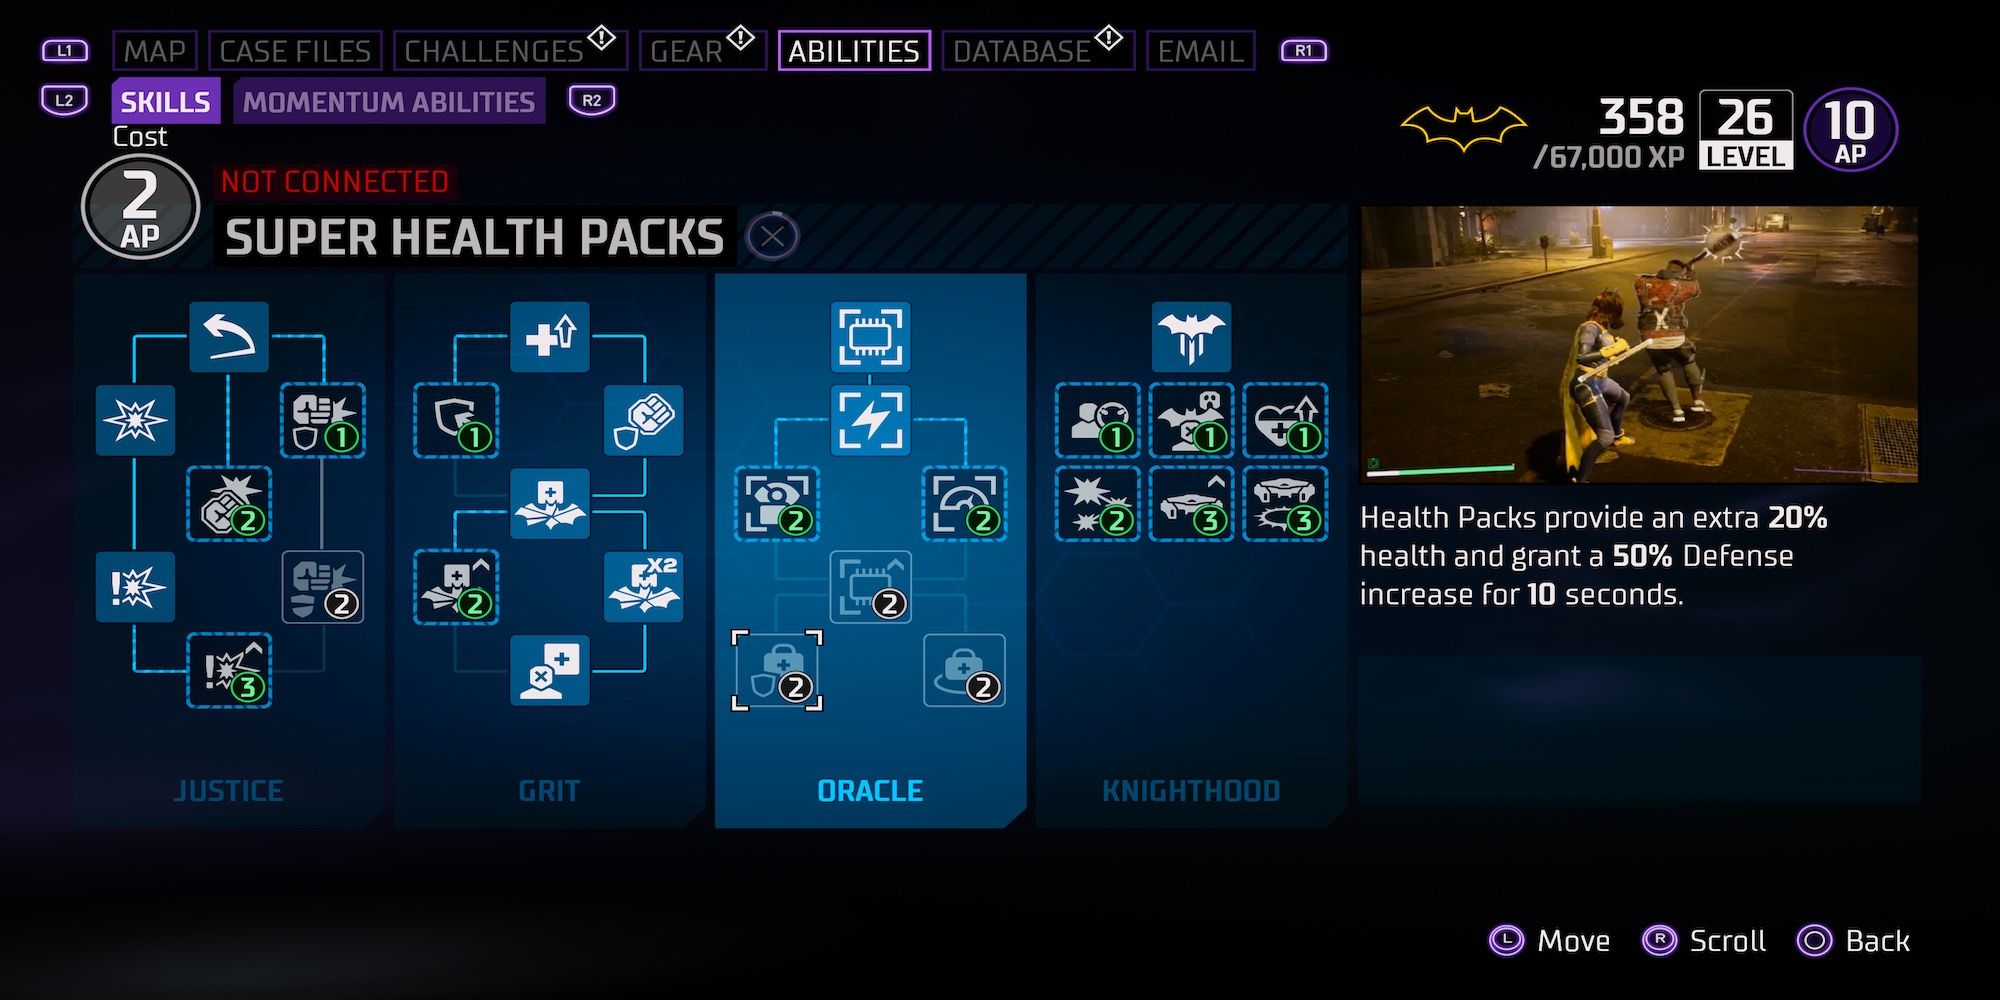 The Super Health Packs upgrade in Gotham Knights